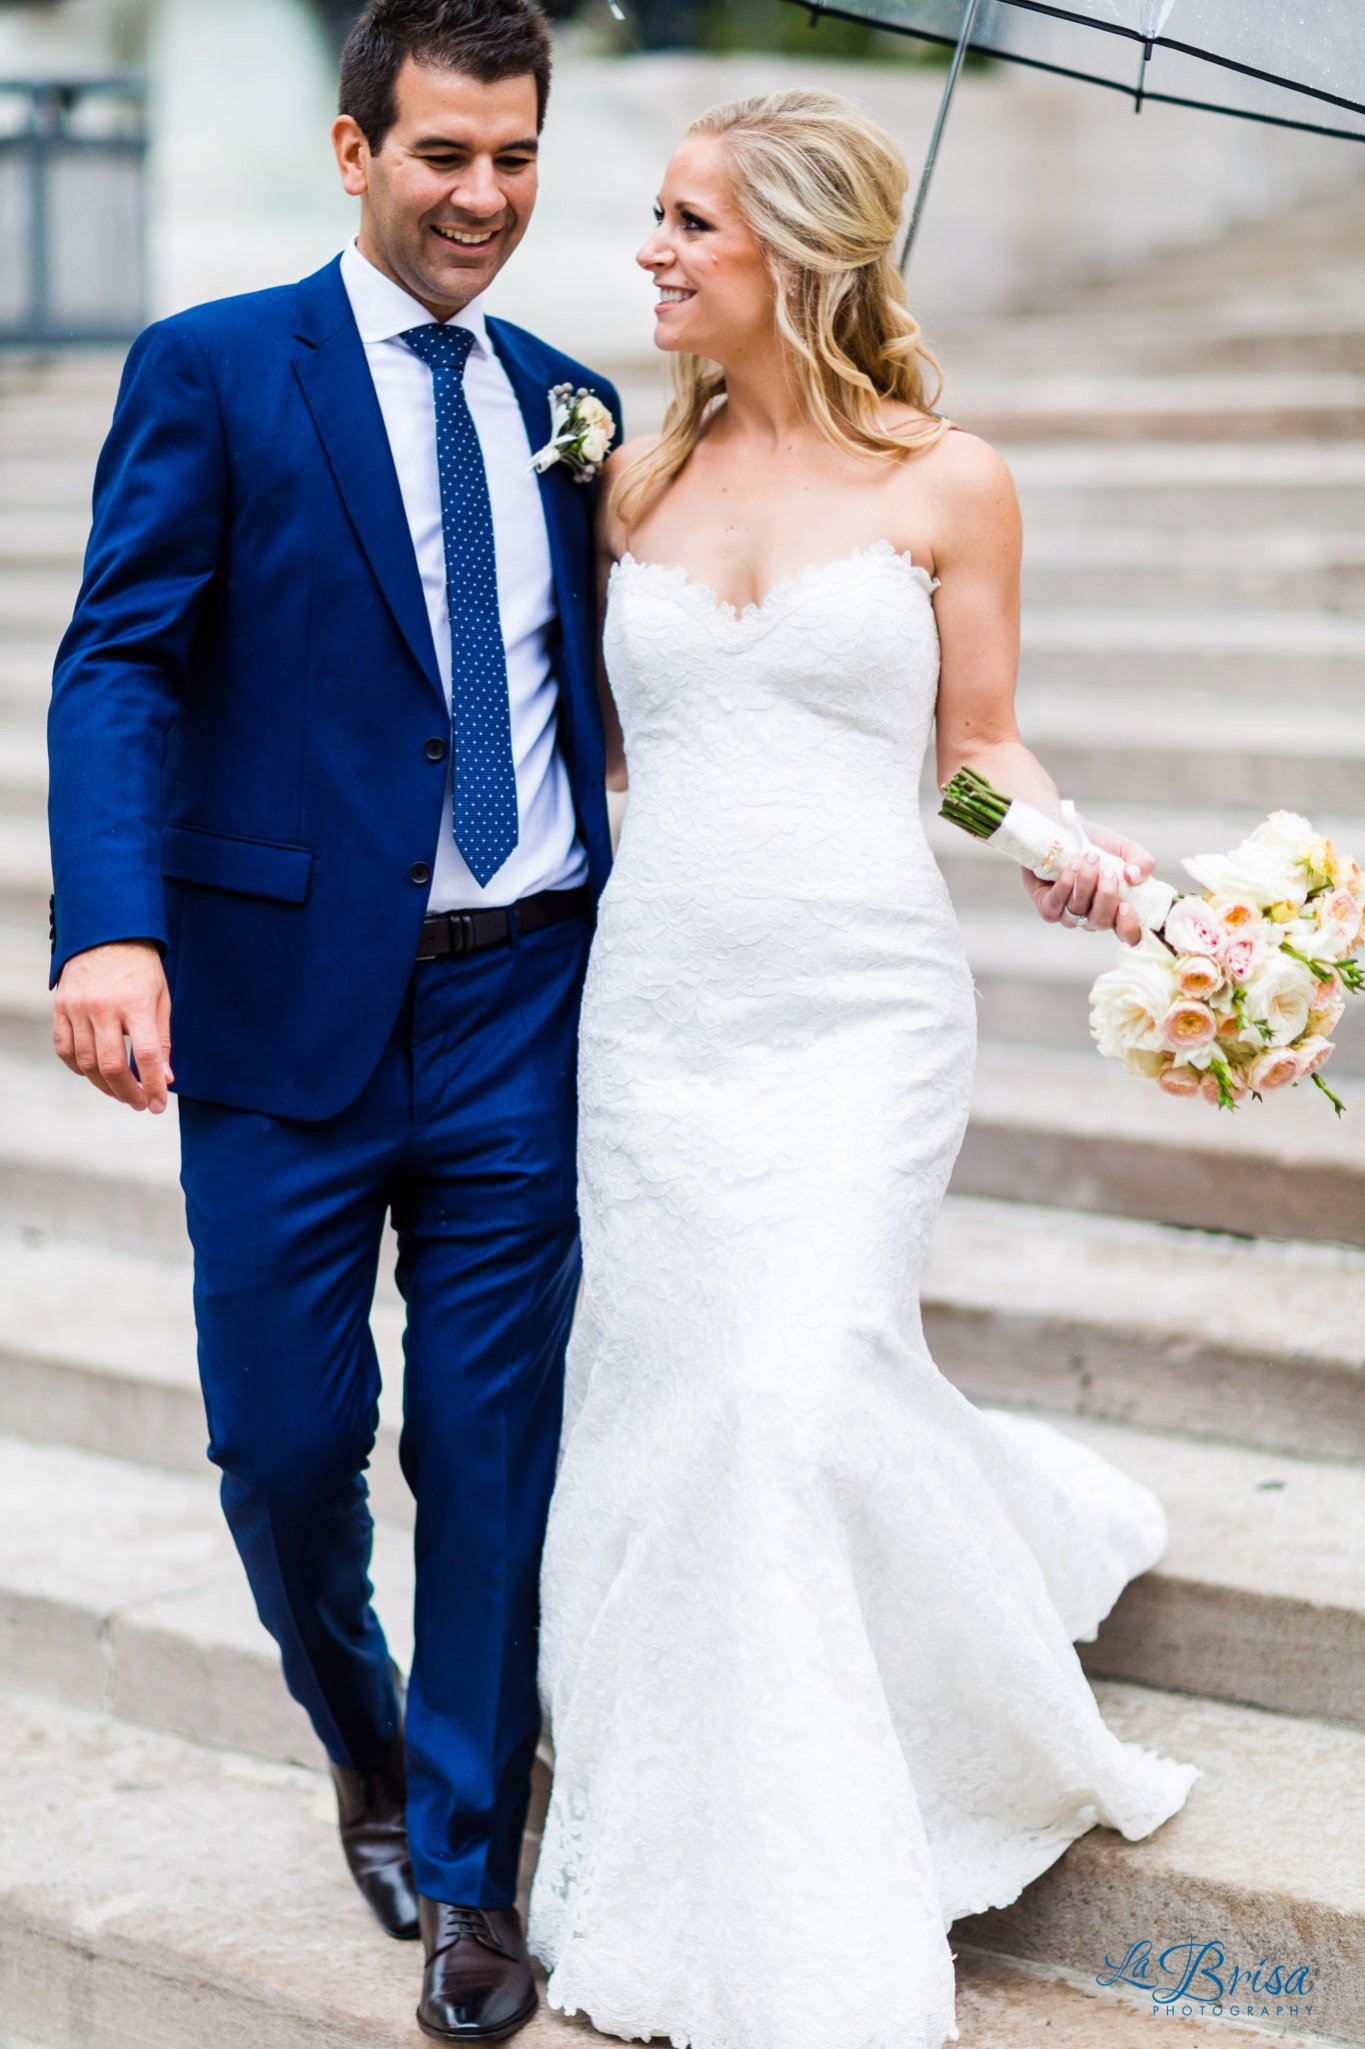 Monica & Neal | Wedding Photography Preview | Indianapolis, IN | Chris Hsieh